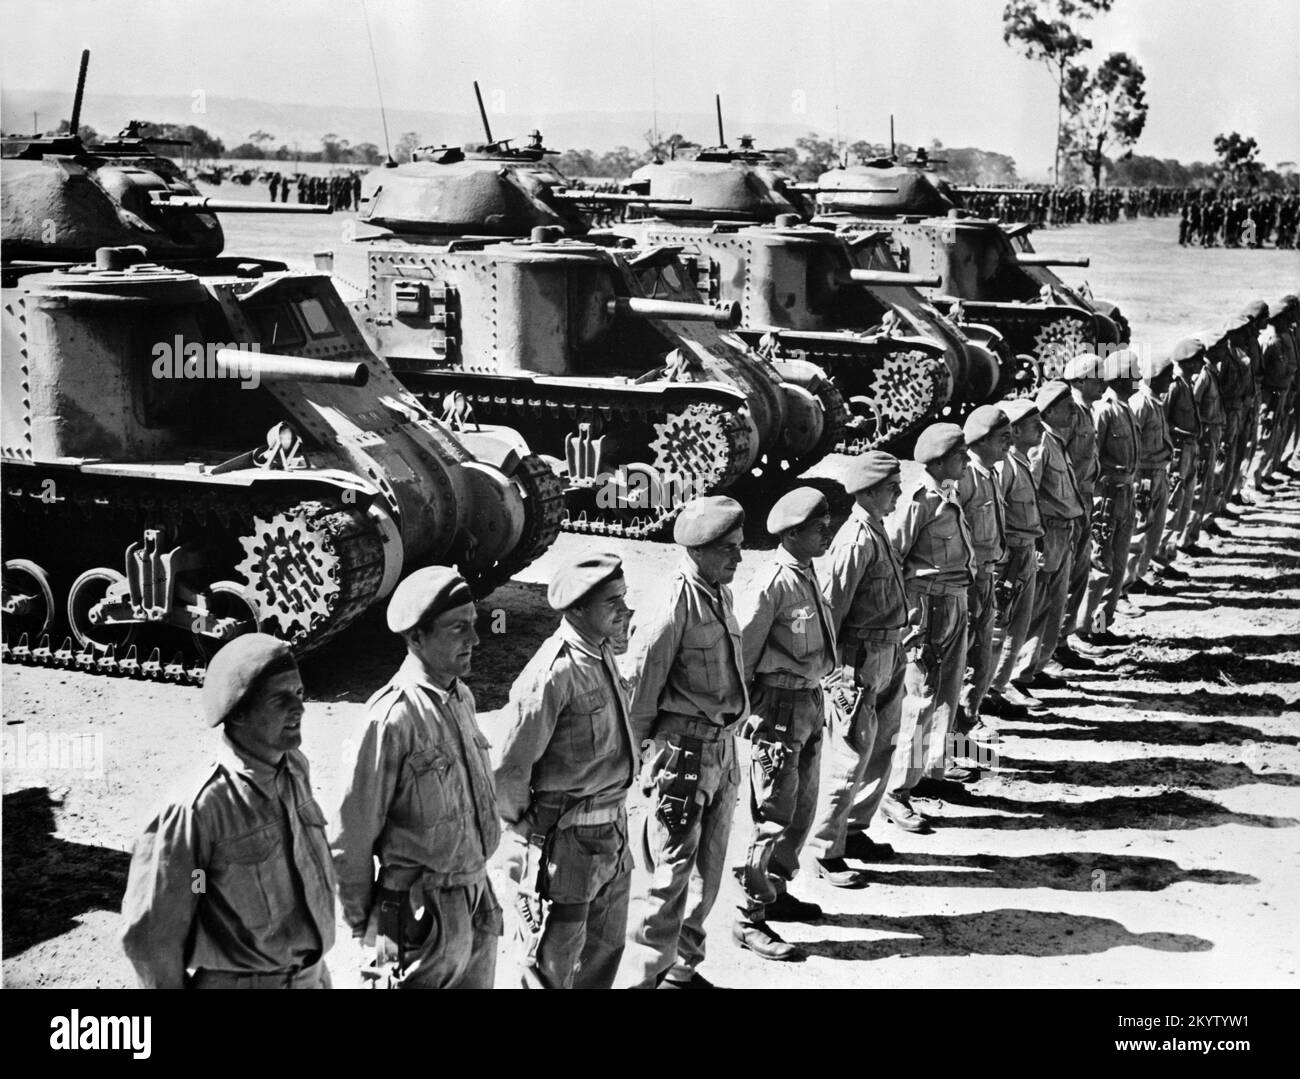 A vintage photo circa March 1943 of a line of American built M3 Grant medium tanks on parade in Australia during World War 2. These vehicles were provided under the lend lease scheme. Stock Photo